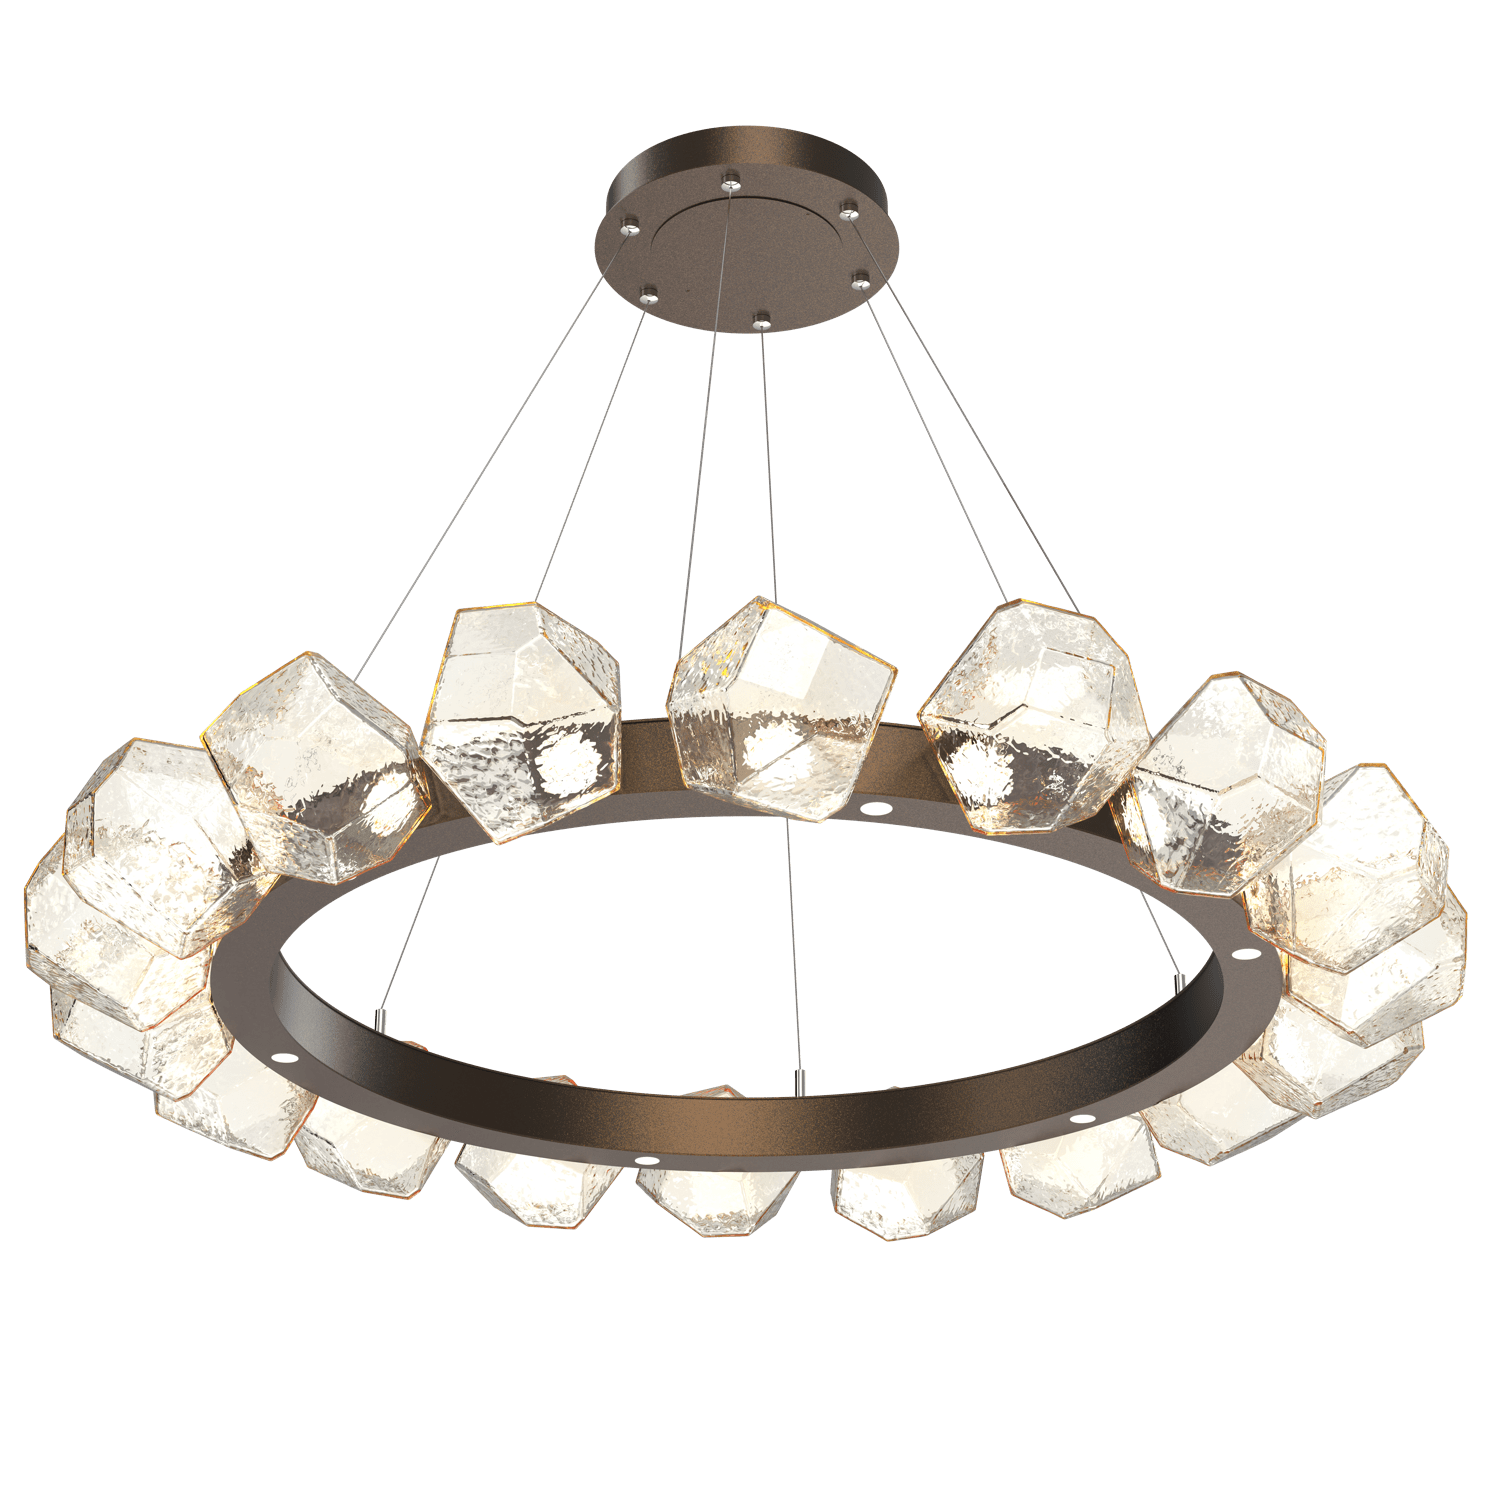 CHB0039-48-FB-A-Hammerton-Studio-Gem-48-inch-radial-ring-chandelier-with-flat-bronze-finish-and-amber-blown-glass-shades-and-LED-lamping